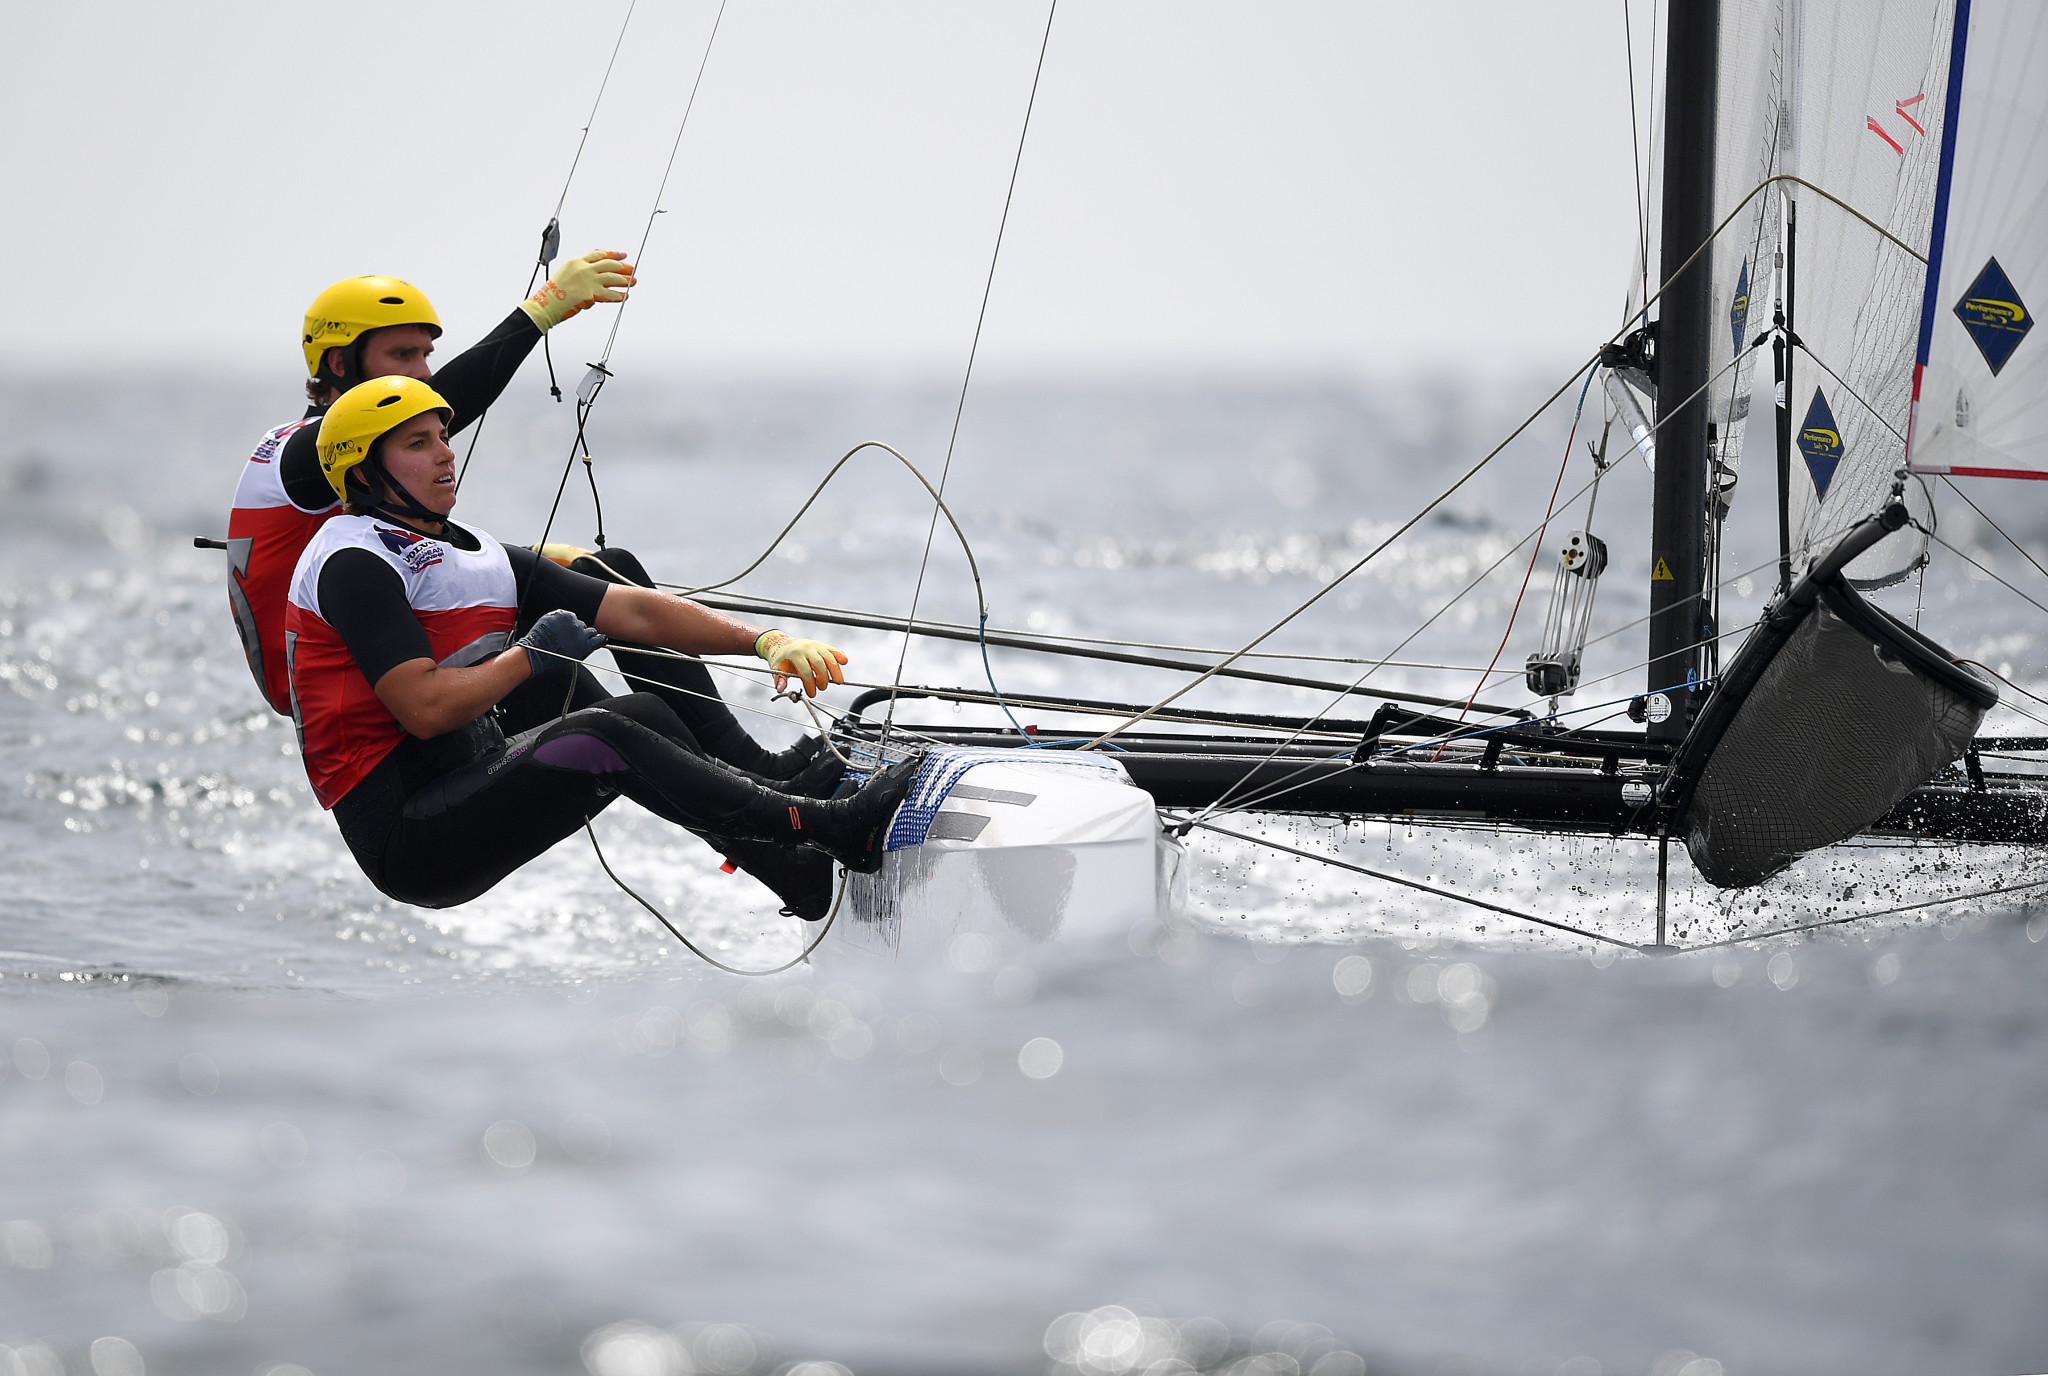 Defending champions Maelle Frascari and Vittorio Bissaro are to defend their Nacra 17 title ©Getty Images